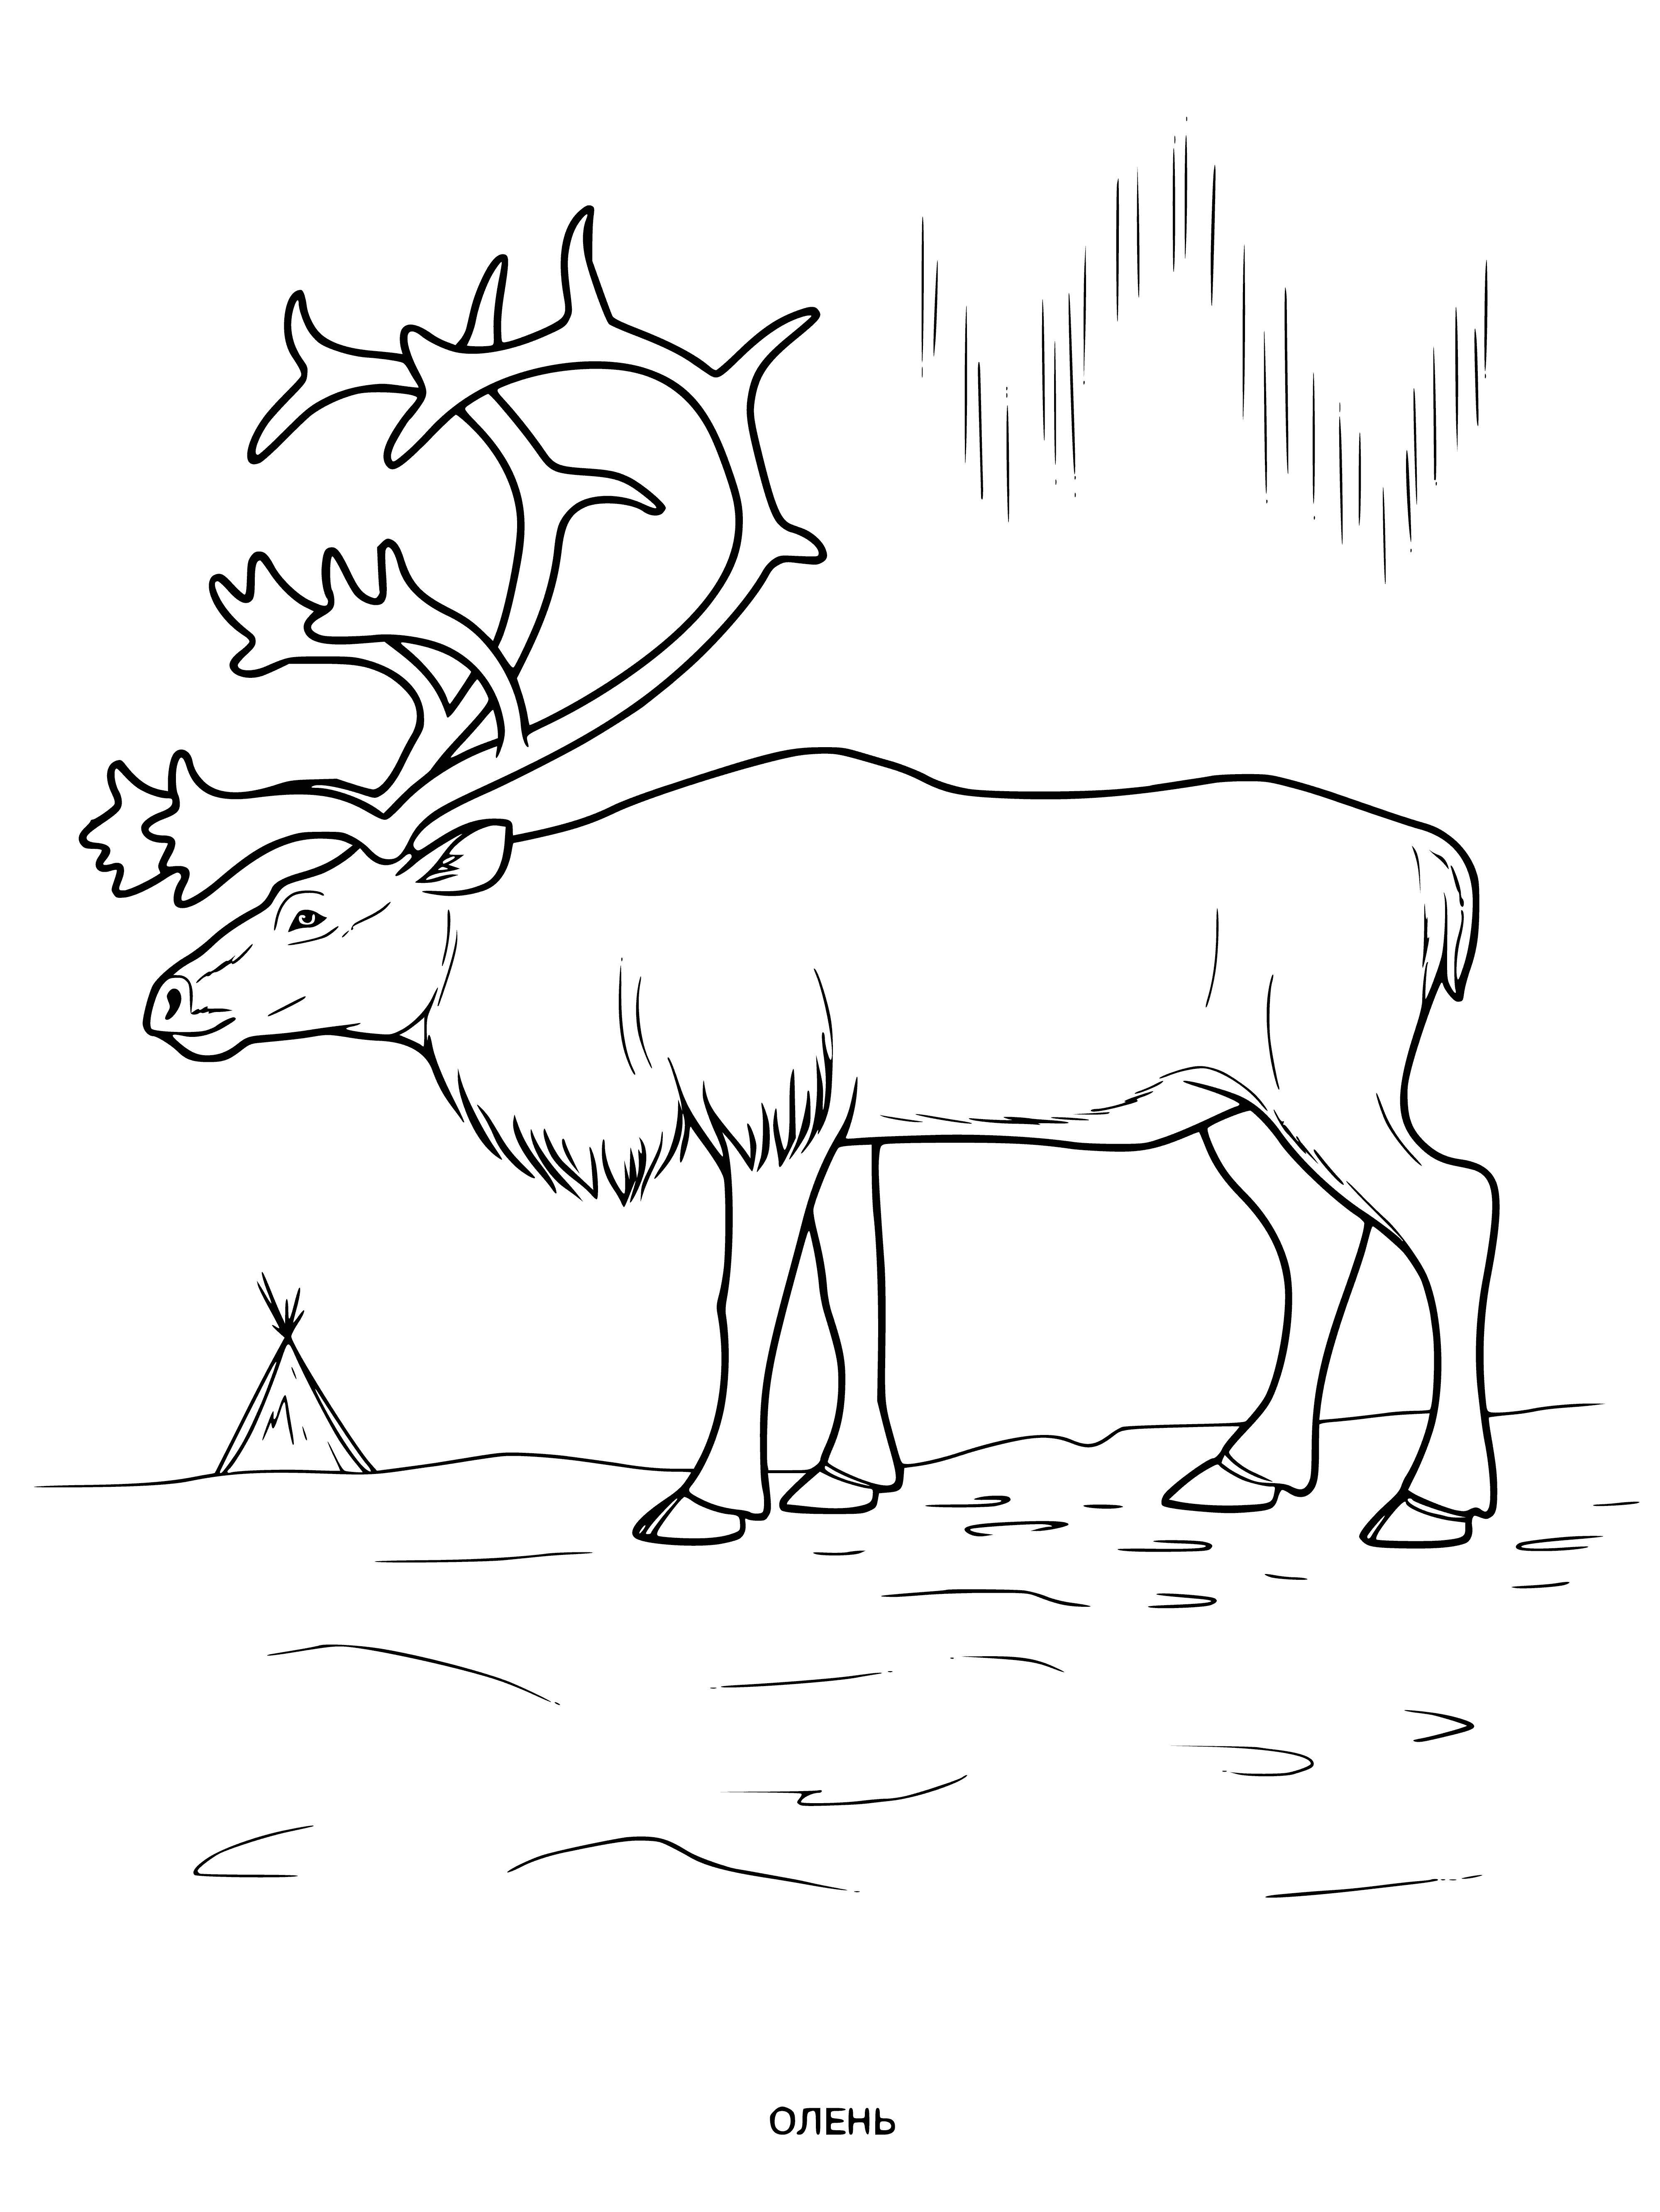 coloring page: 140 characters: Brown deer w/ white tail stands in grass in nature coloring page.